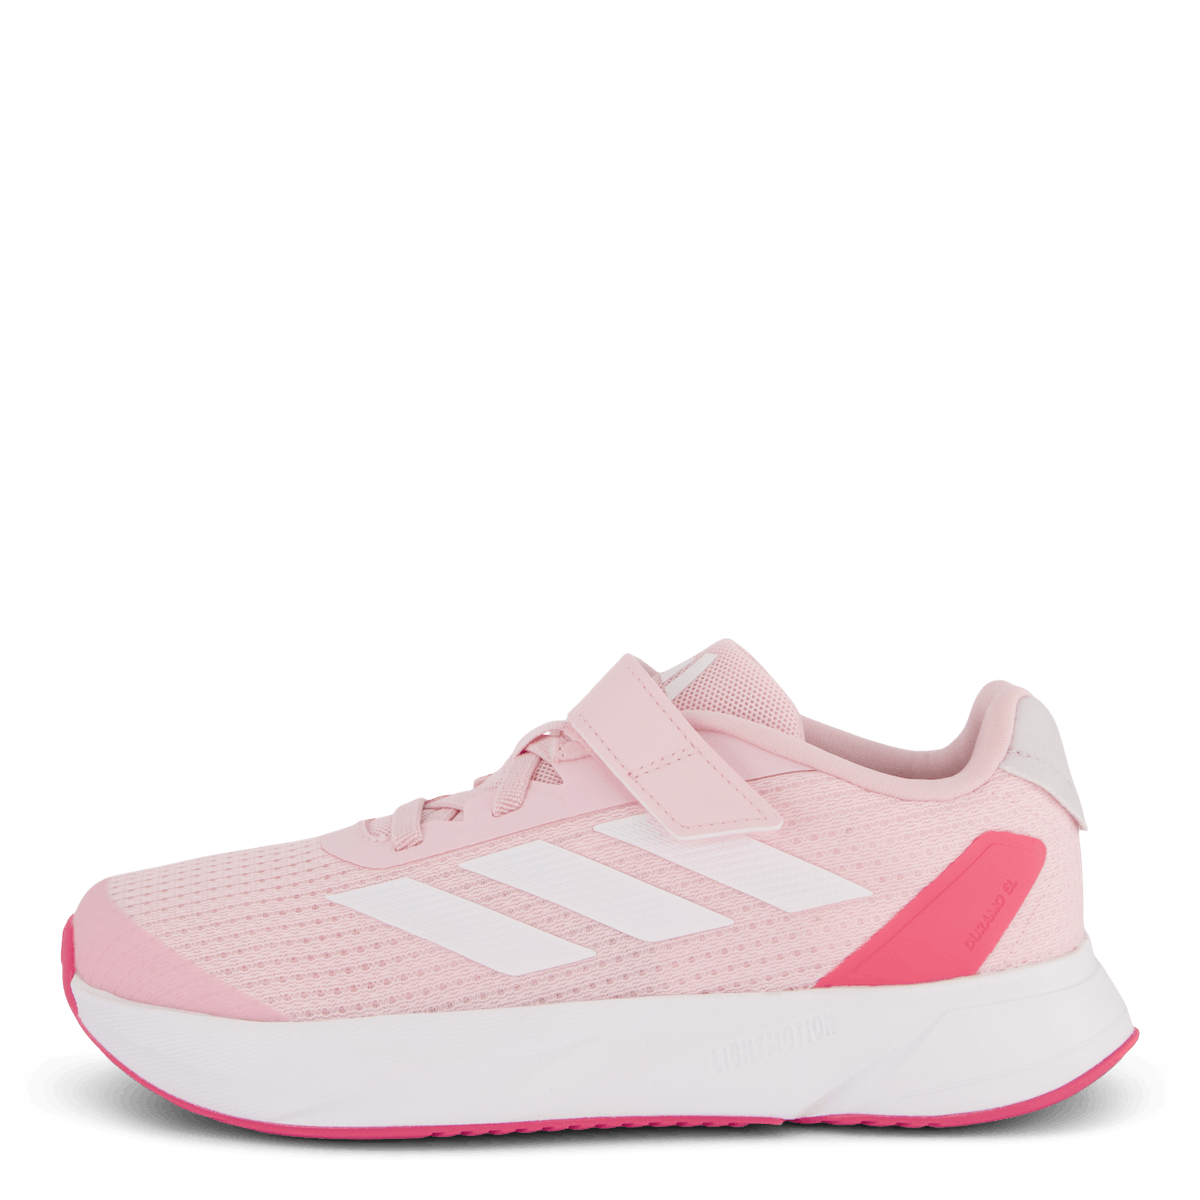 Duramo SL Shoes Kids Clear Pink / Cloud White / Pink Fusion